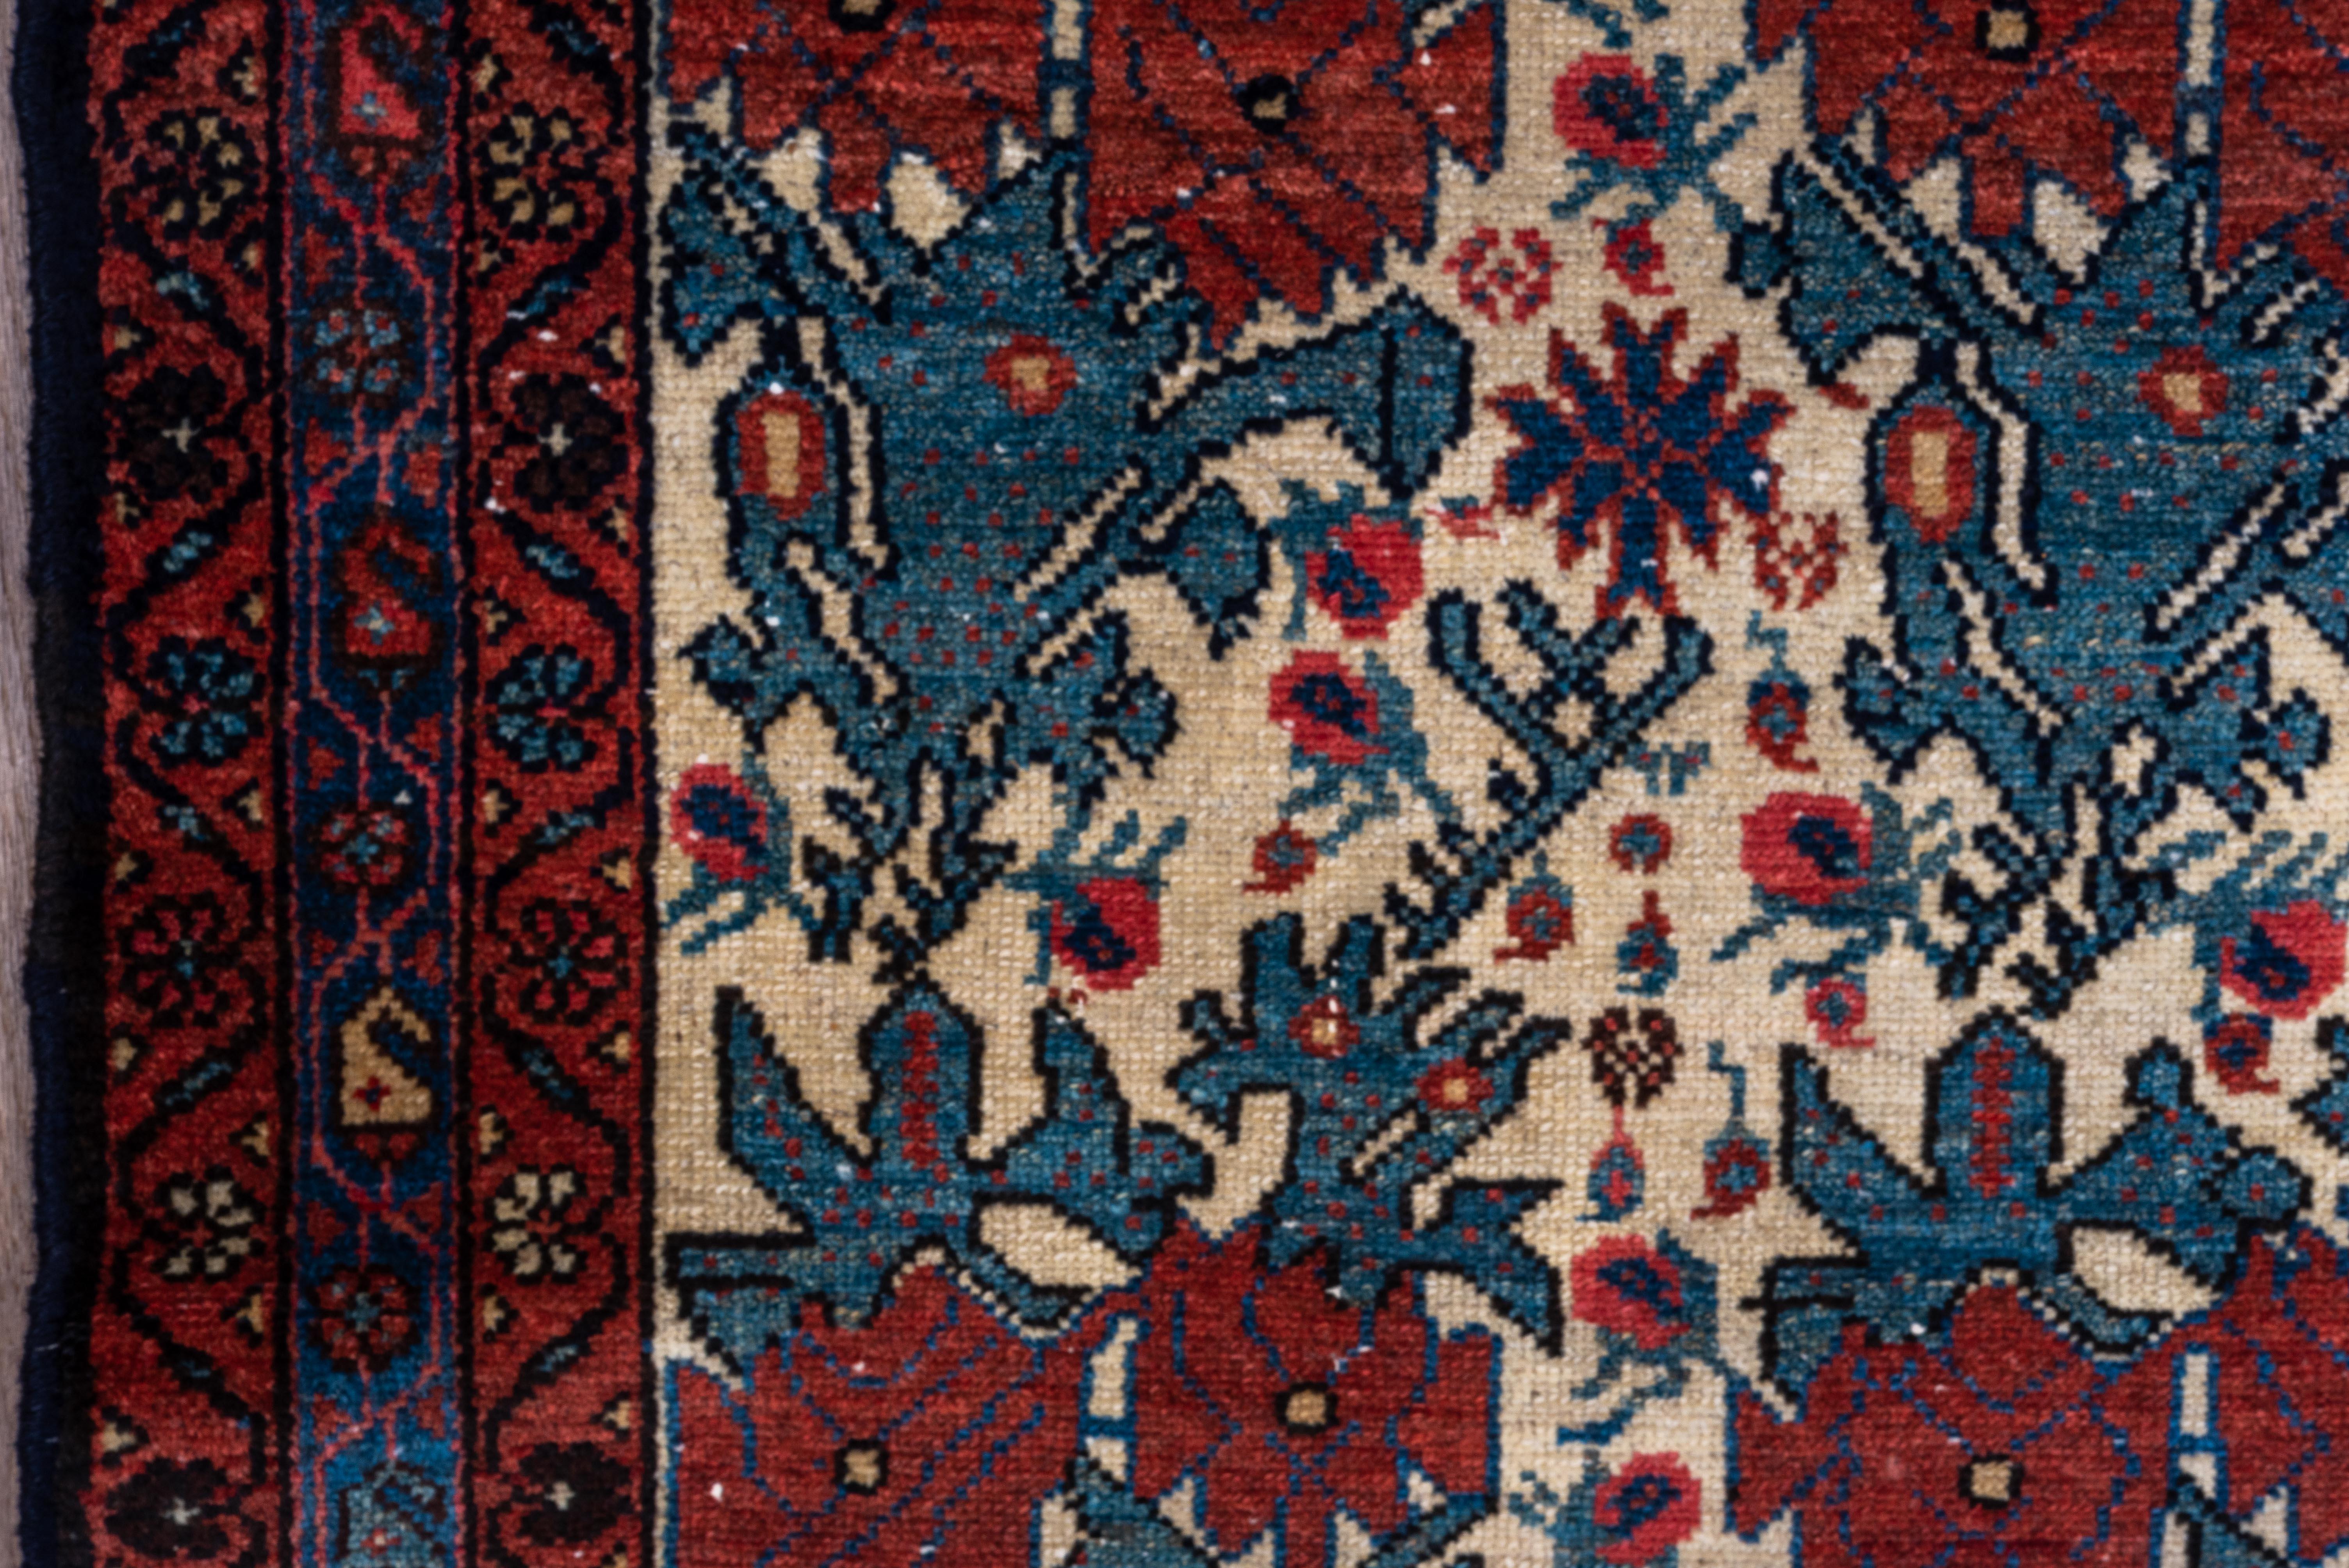 Wool 12 Rose Florets Across Center Field - Malayer Rug - Antique 1940 For Sale